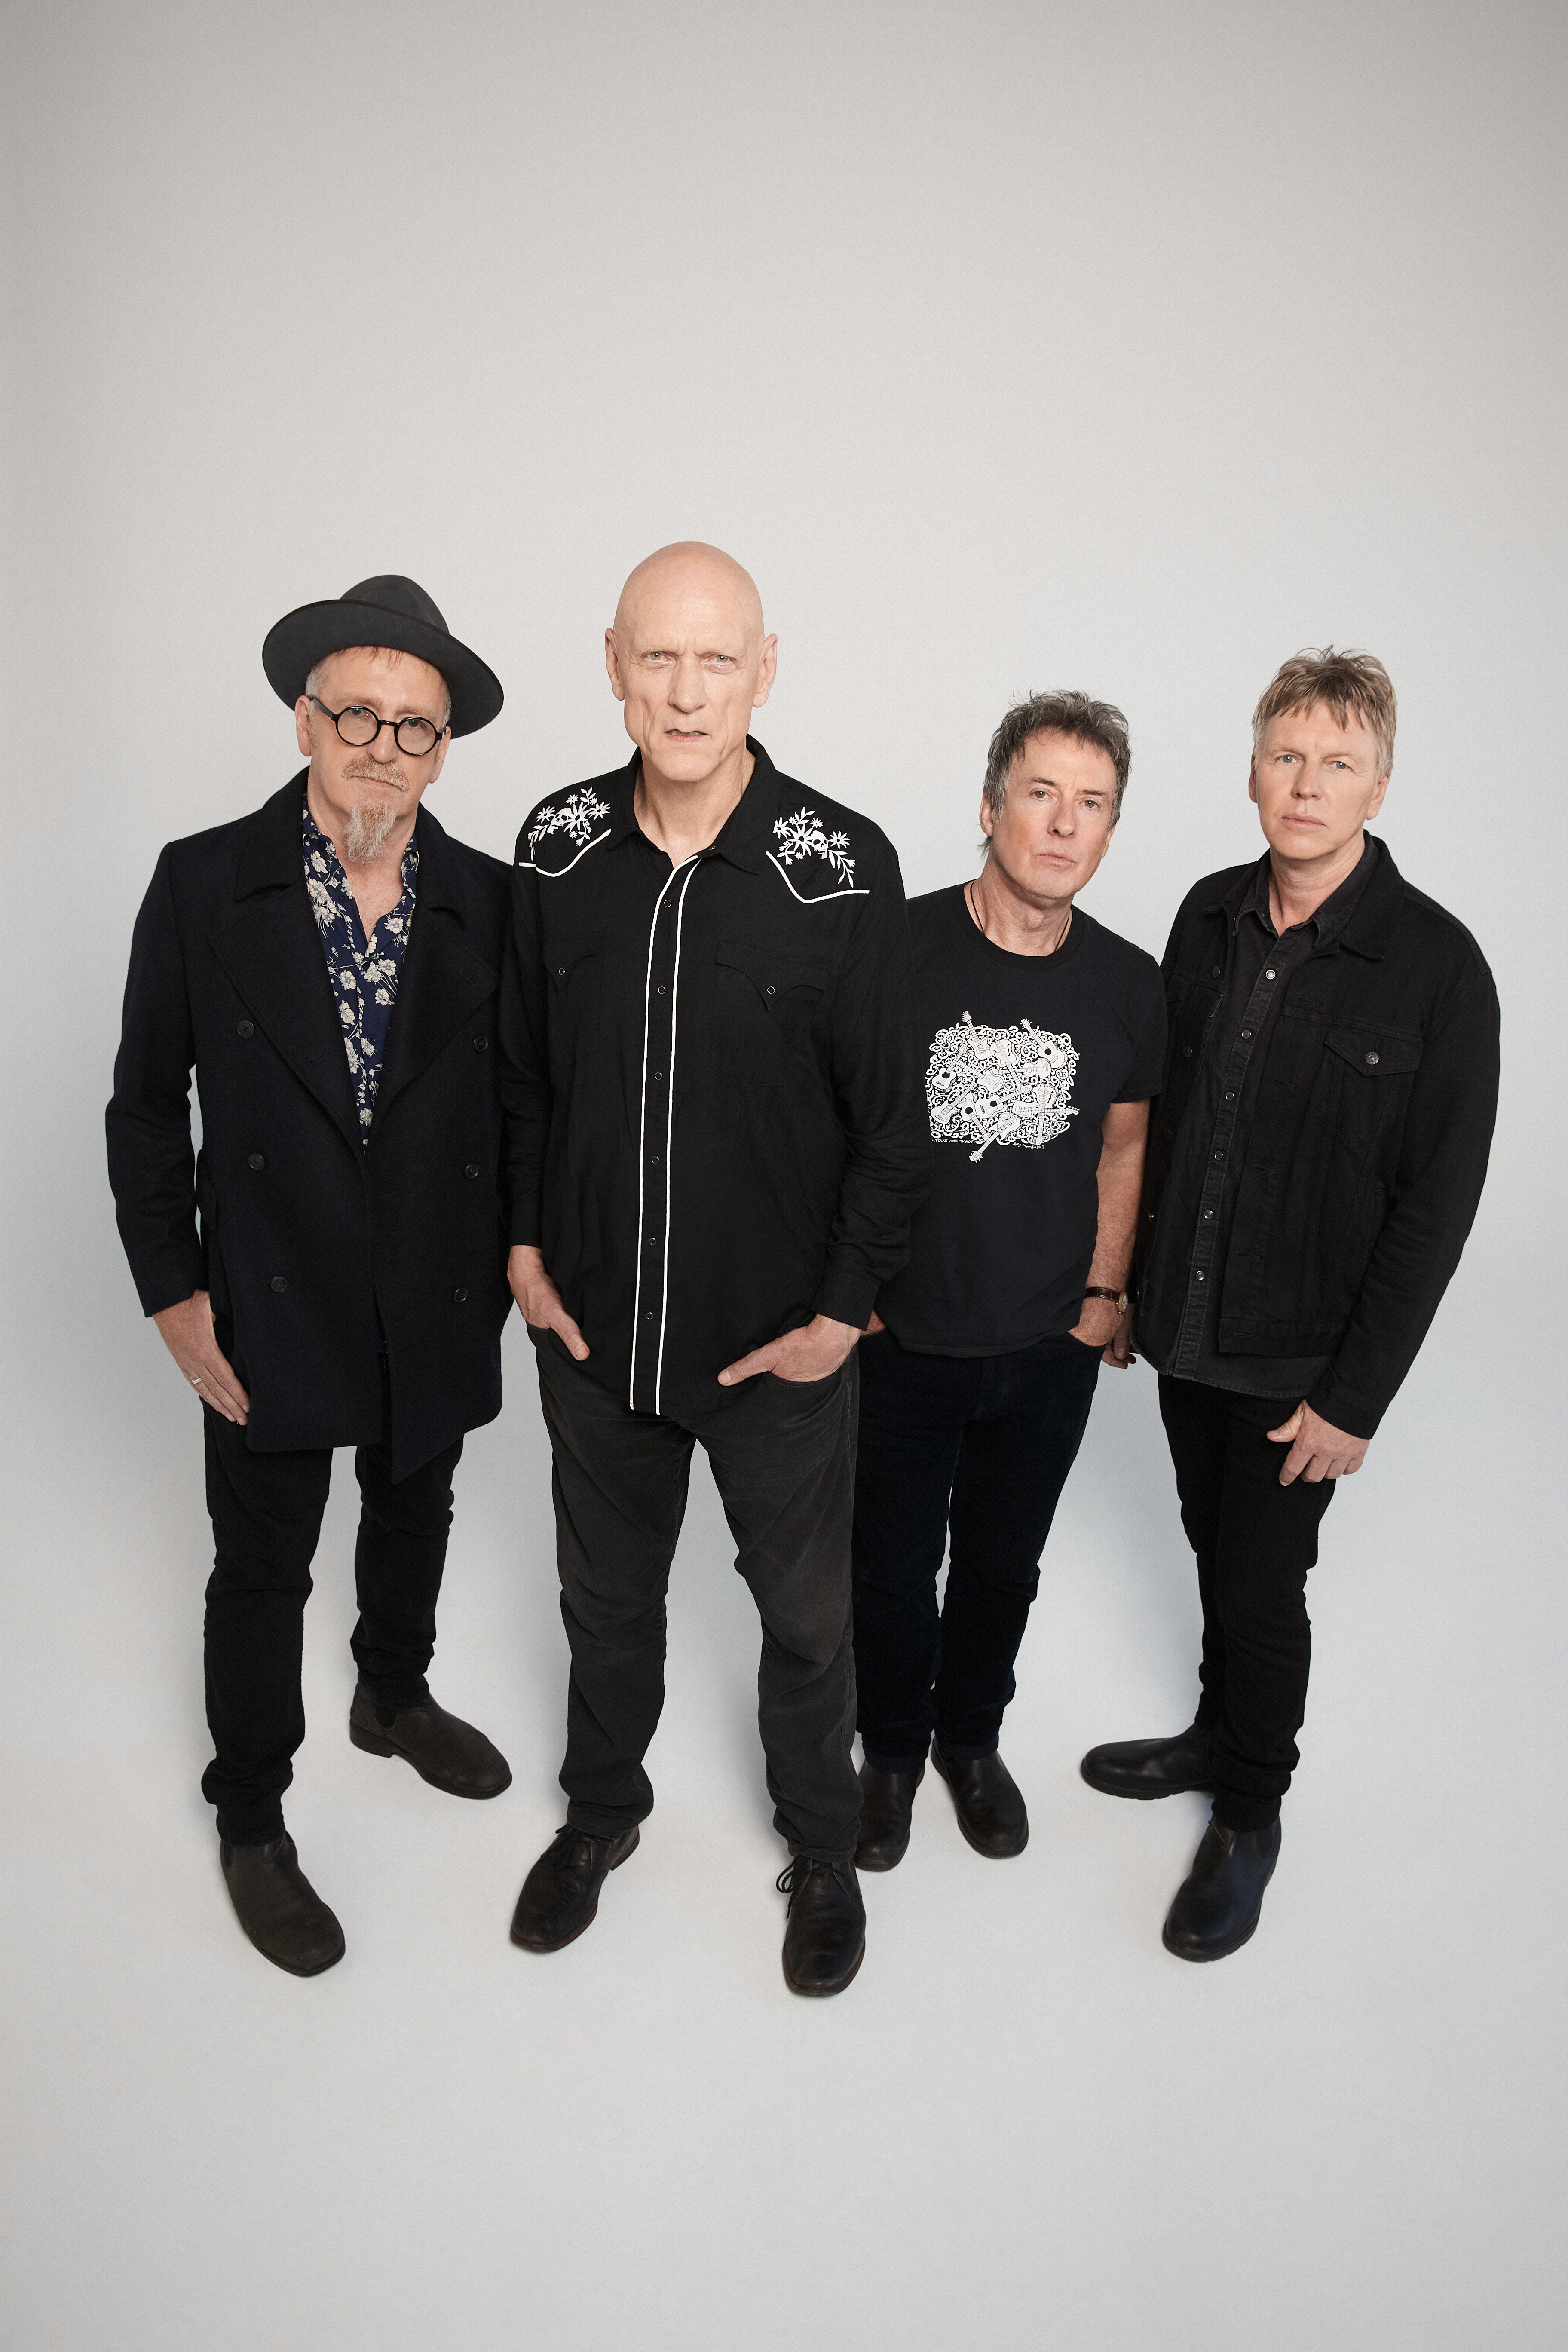 Midnight Oil scored five ARIA nominations at the 2021 ceremony.